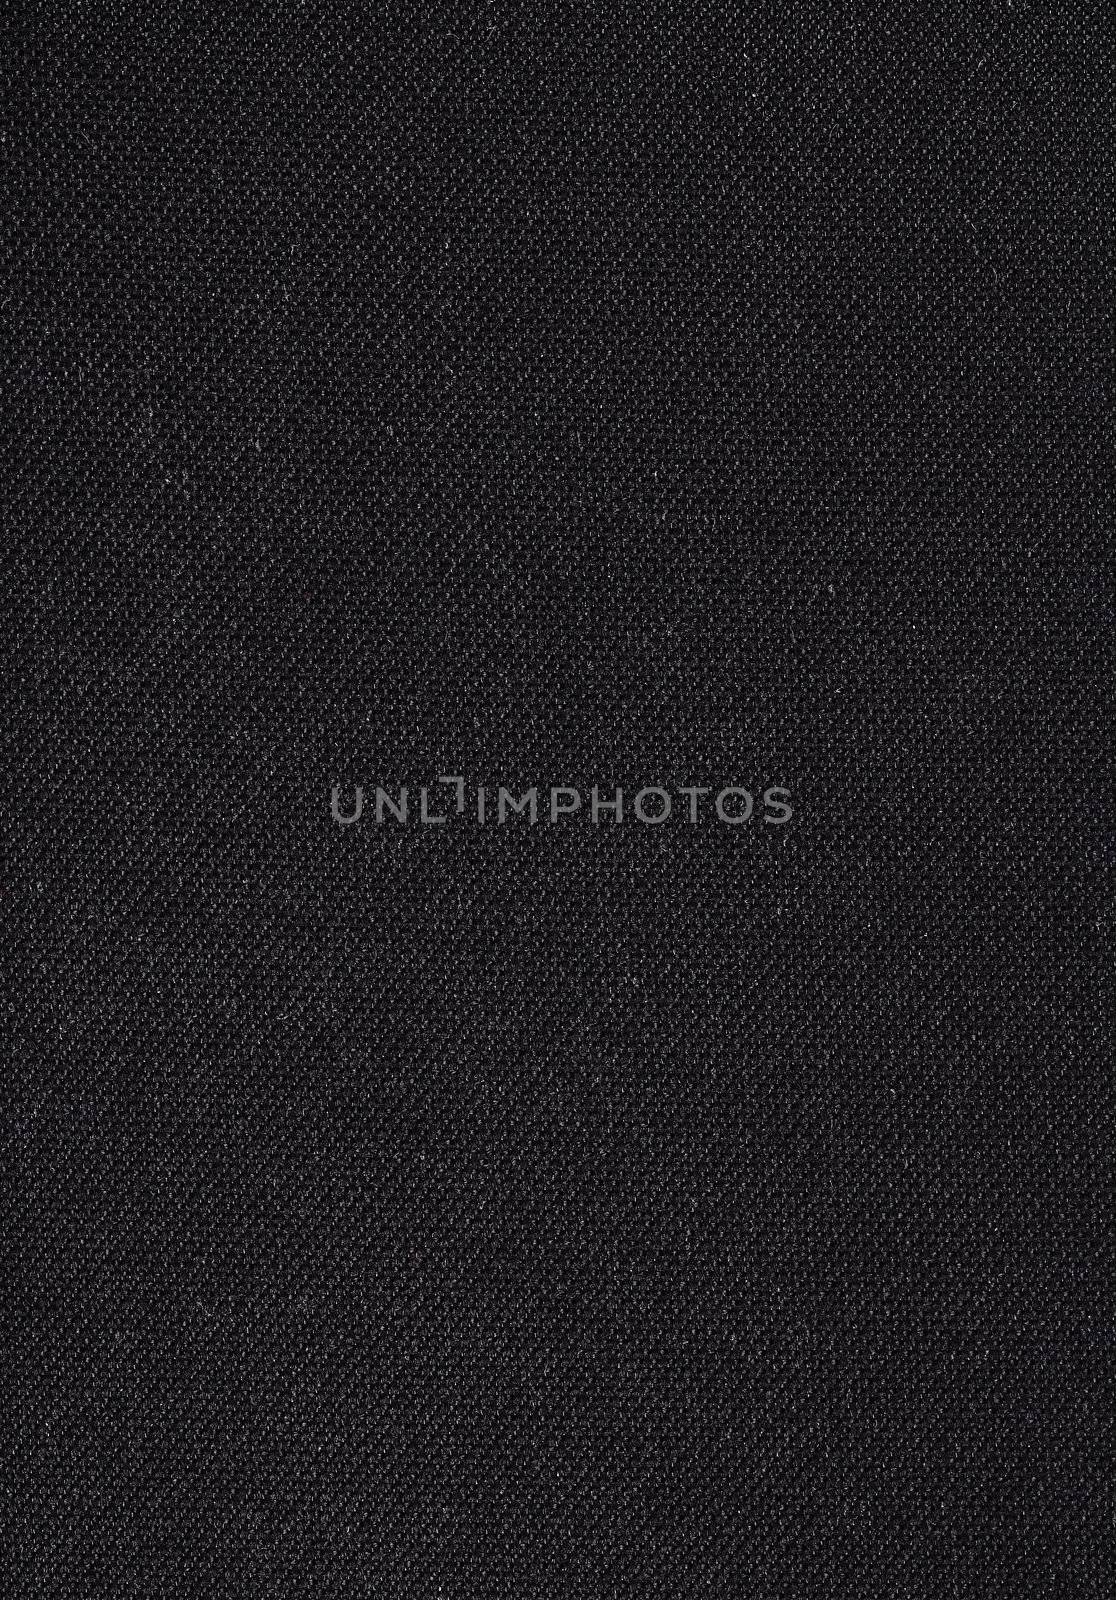 Black fabric texture. Clothes background. Close up